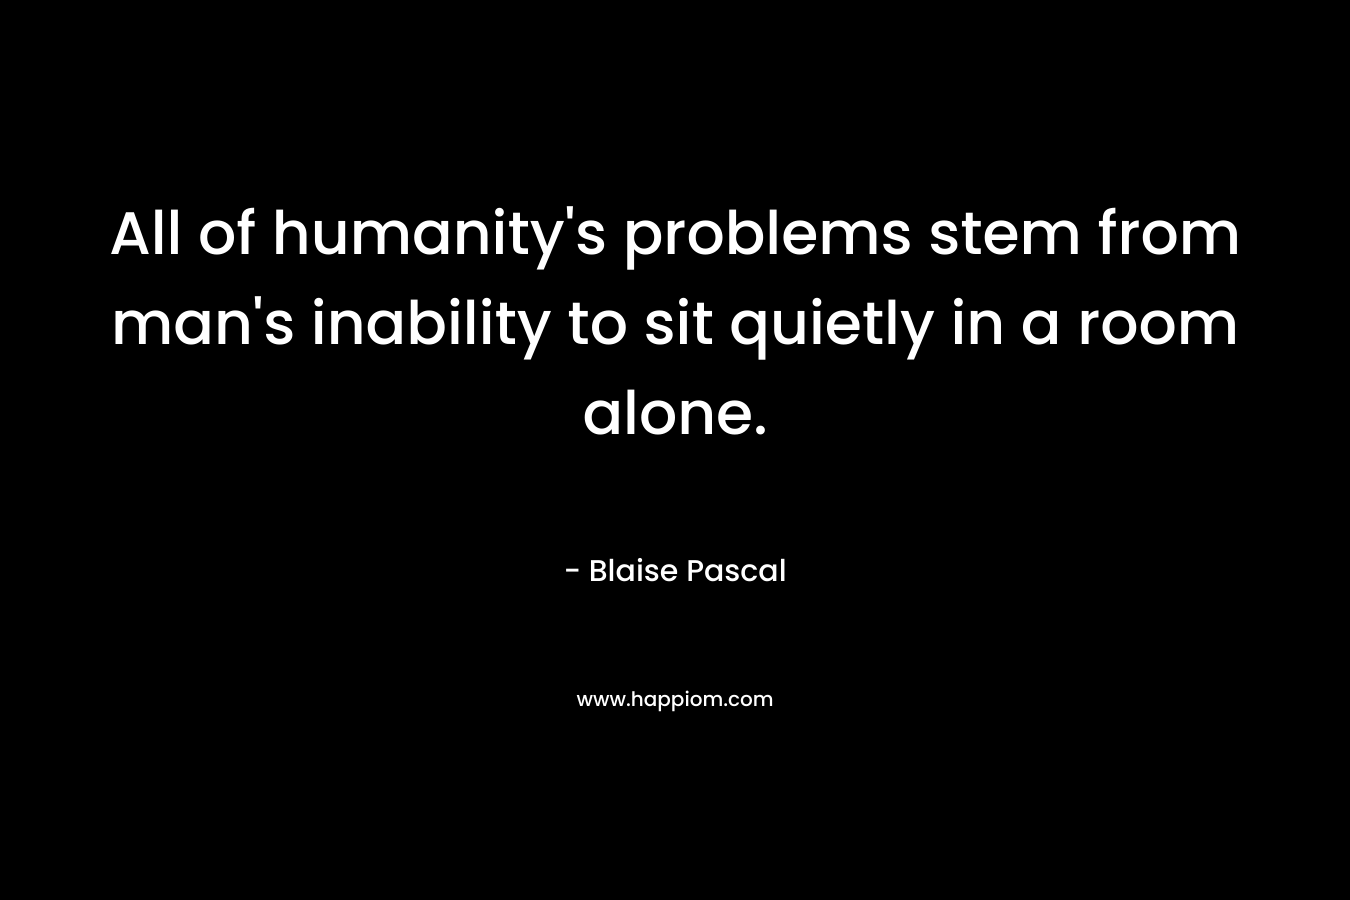 All of humanity’s problems stem from man’s inability to sit quietly in a room alone. – Blaise Pascal